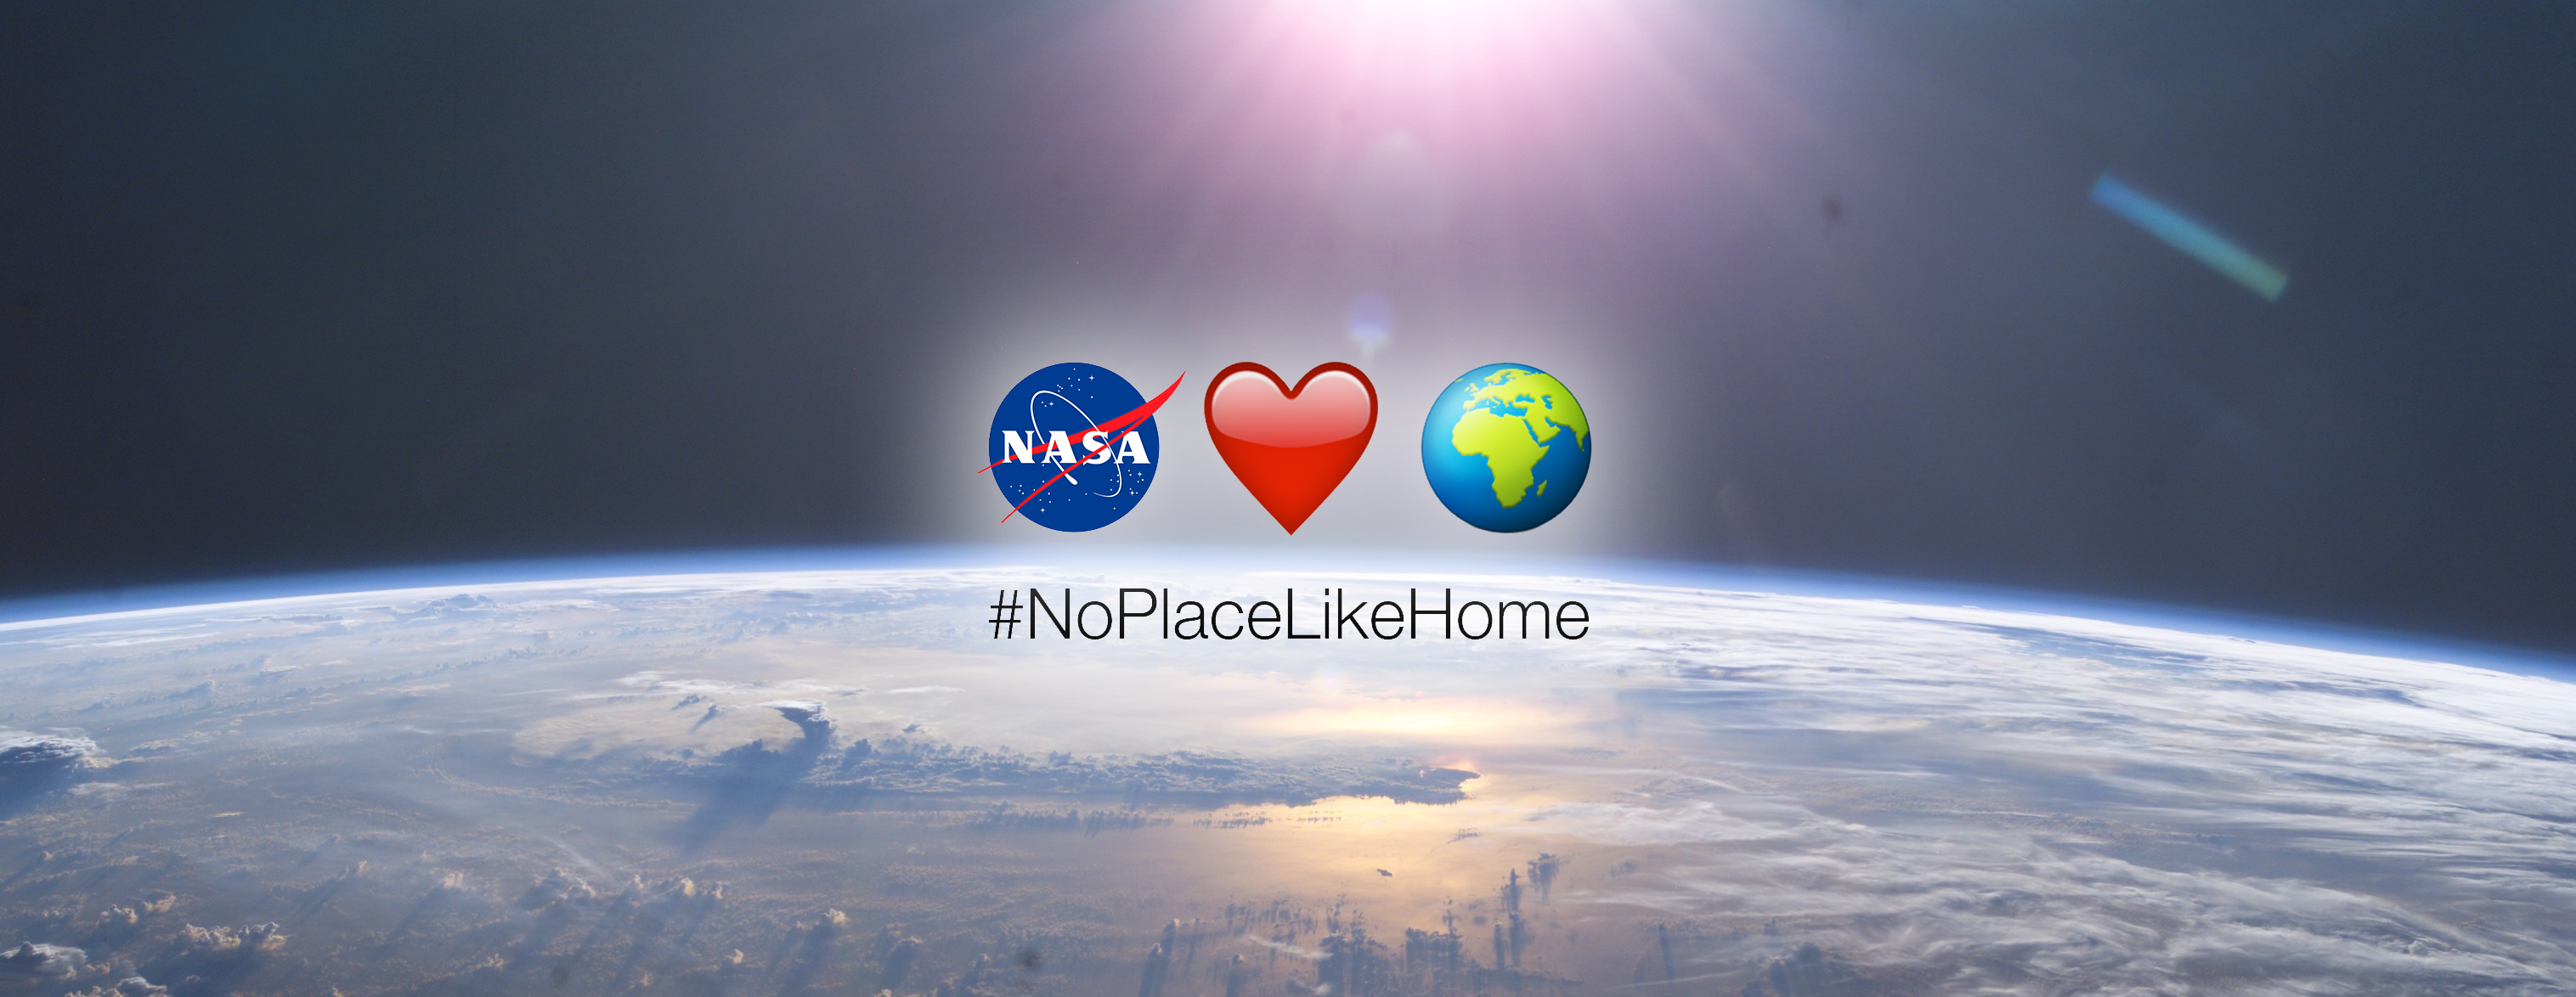 #NoPlaceLikeHome emojis superimposed over an Earth photograph from the ISS